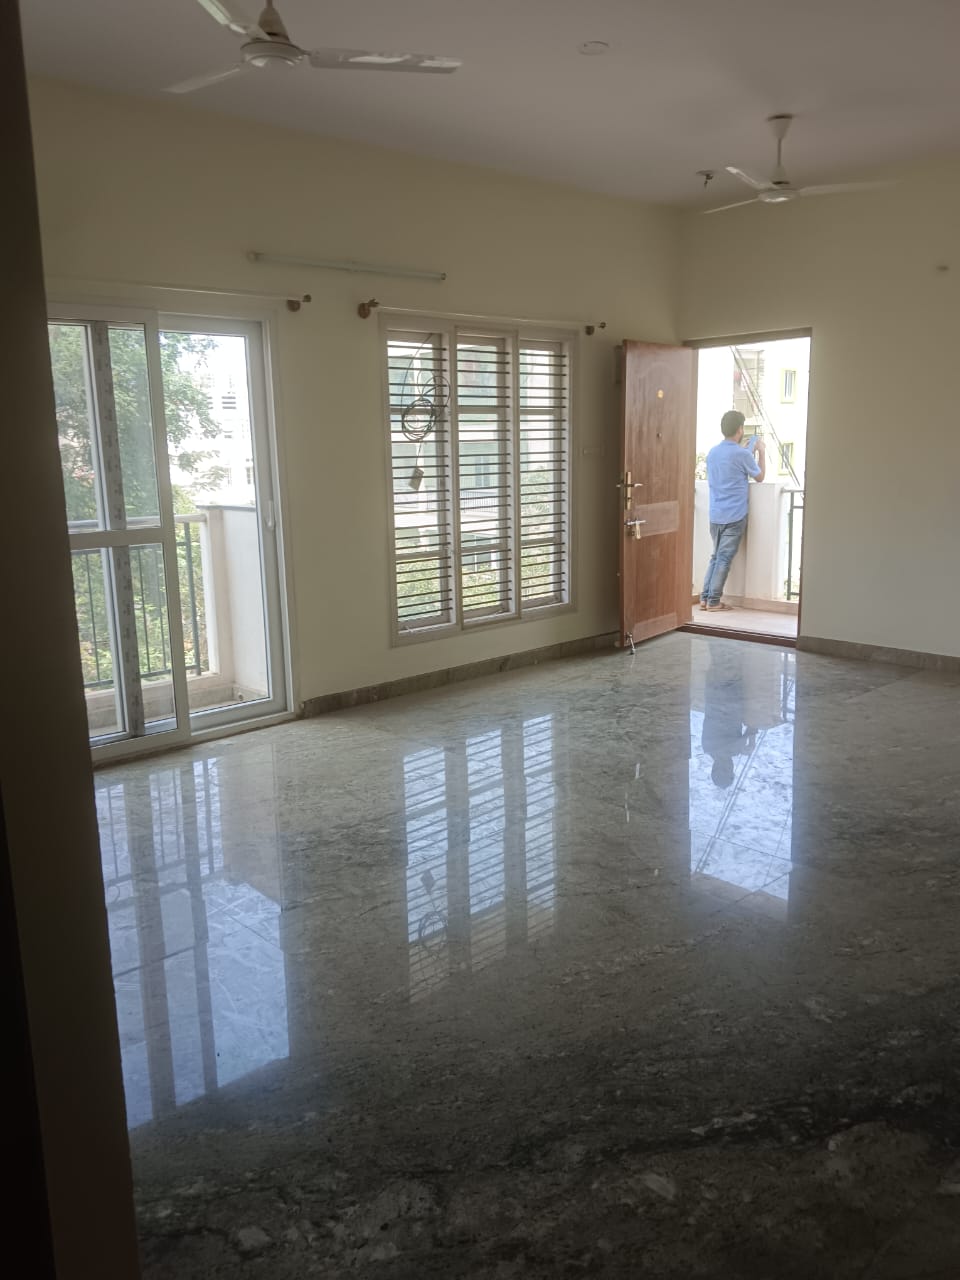 2 BHK Residential Apartment for Lease Only at JAML2 - 3579 - 27 Lakhs in Brookefield